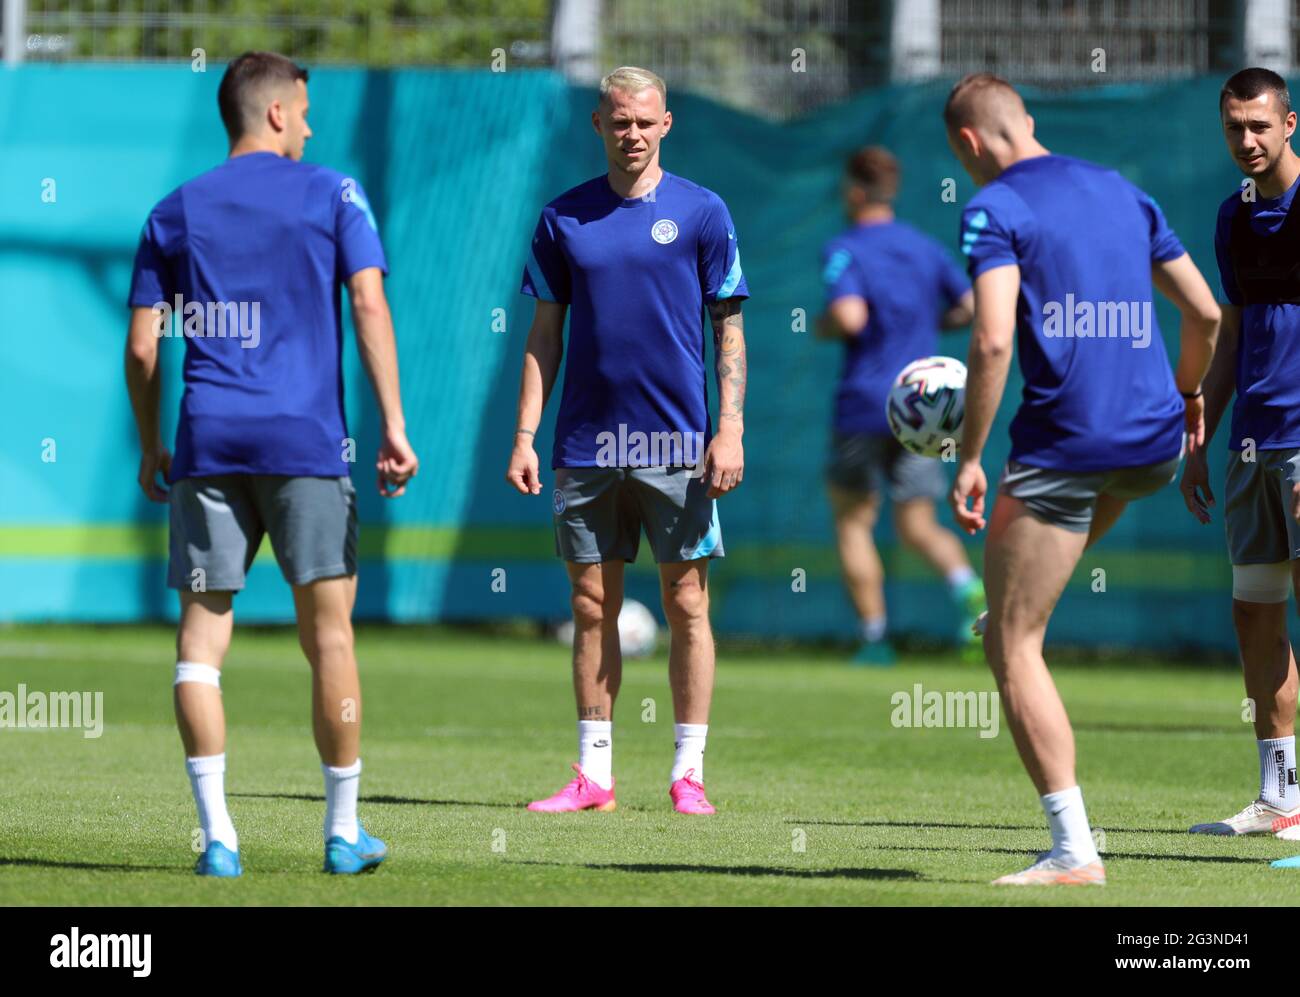 St. Petersburg, Russia. 17th June, 2021. Football: European Championship, Group E, final training Slovakia before the match against Sweden. Ondrej Duda (M) stands on the pitch during training. Credit: Igor Russak/dpa/Alamy Live News Stock Photo